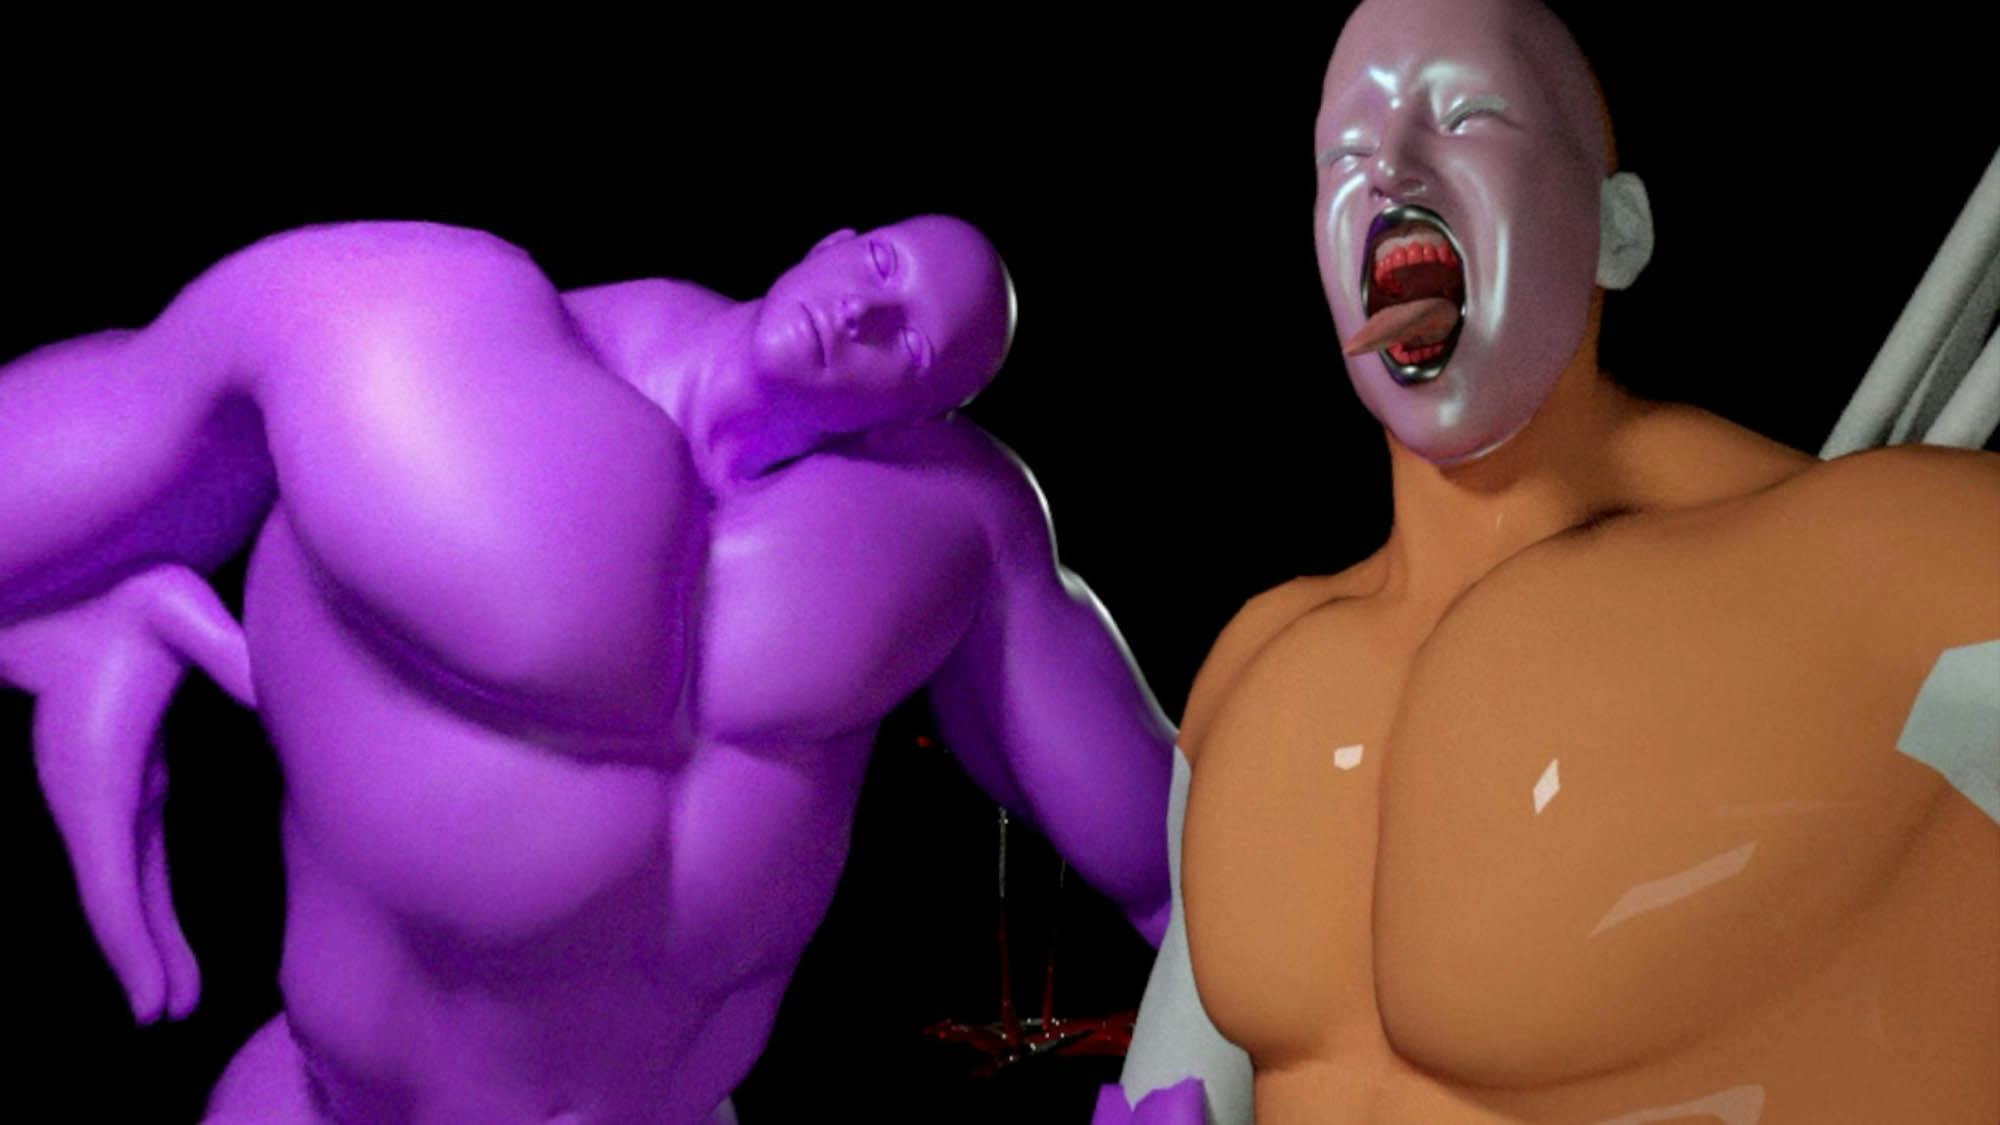 CG image of two bald, musclebound figures with purple and orange skin make strange faces at the camera.